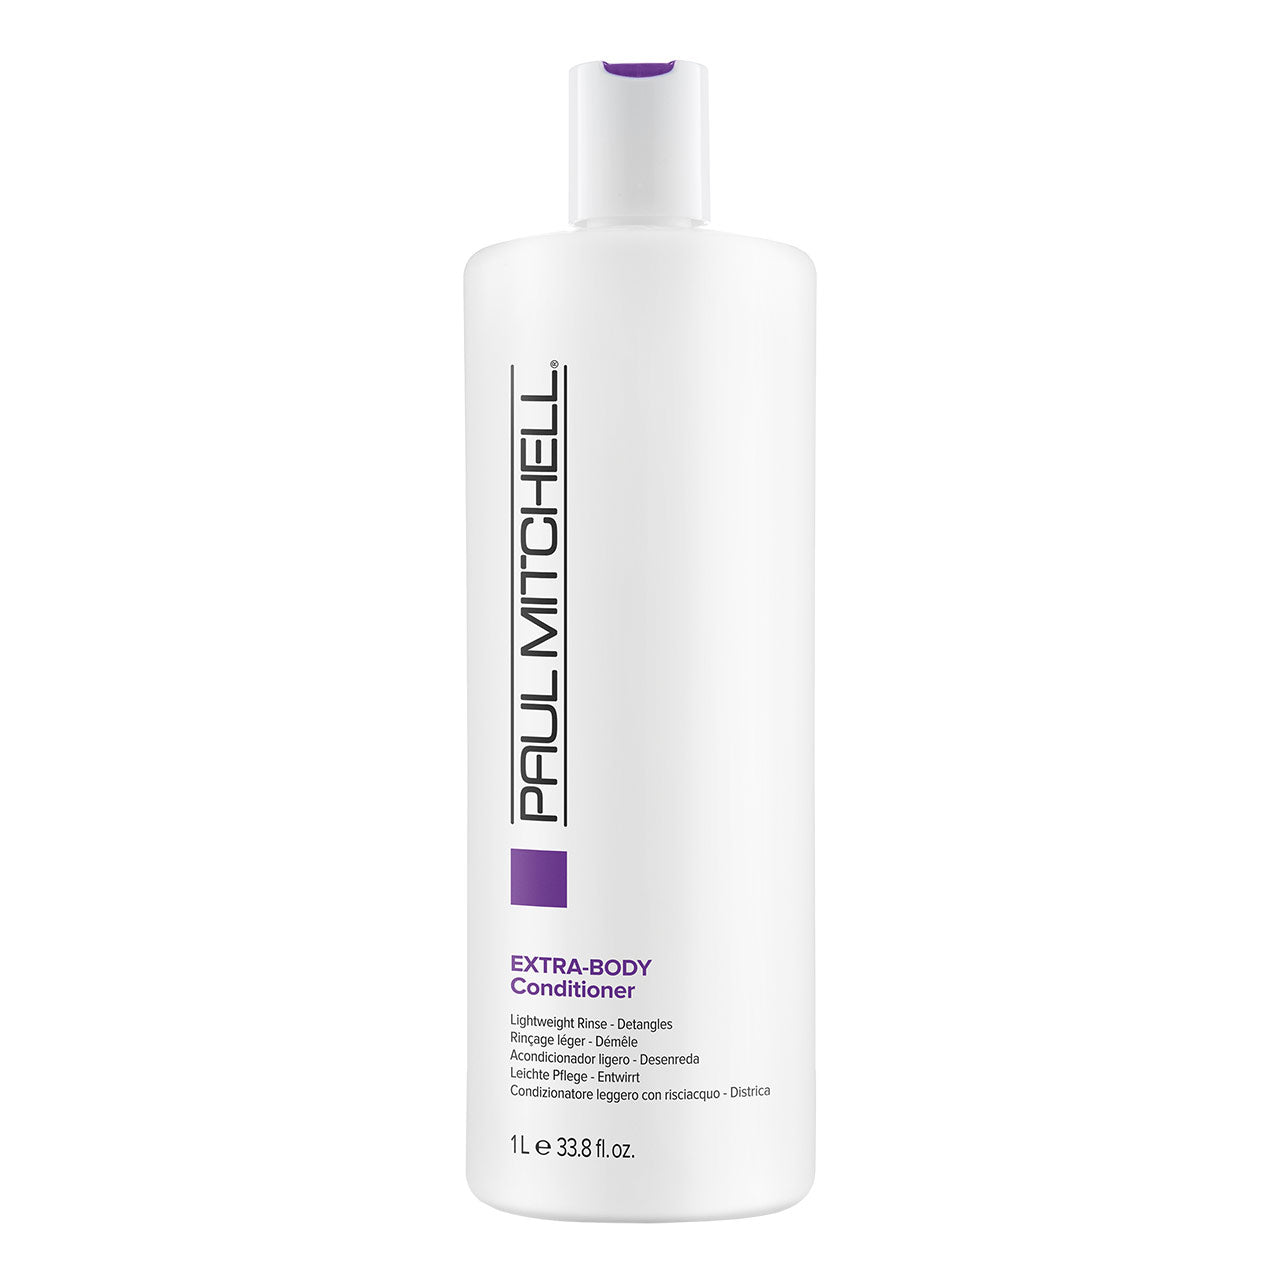 Extra-Body Conditioner - 1L - by Paul Mitchell |ProCare Outlet|